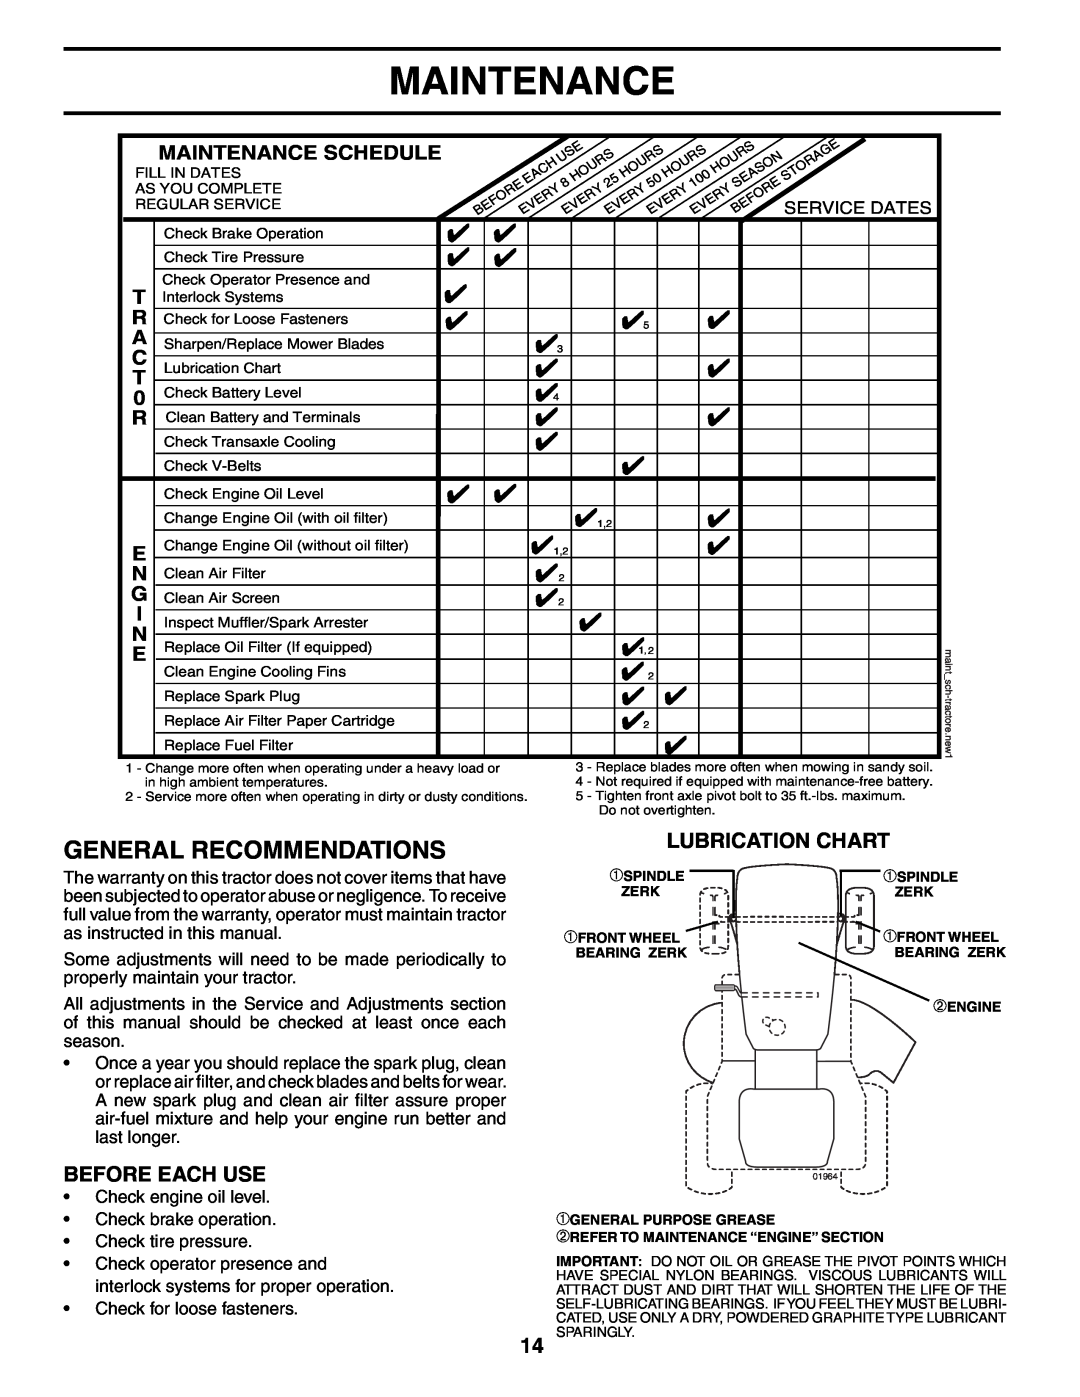 Weed Eater WE1338A, 184404 manual General Recommendations, Lubrication Chart, Before Each Use, Maintenance Schedule 